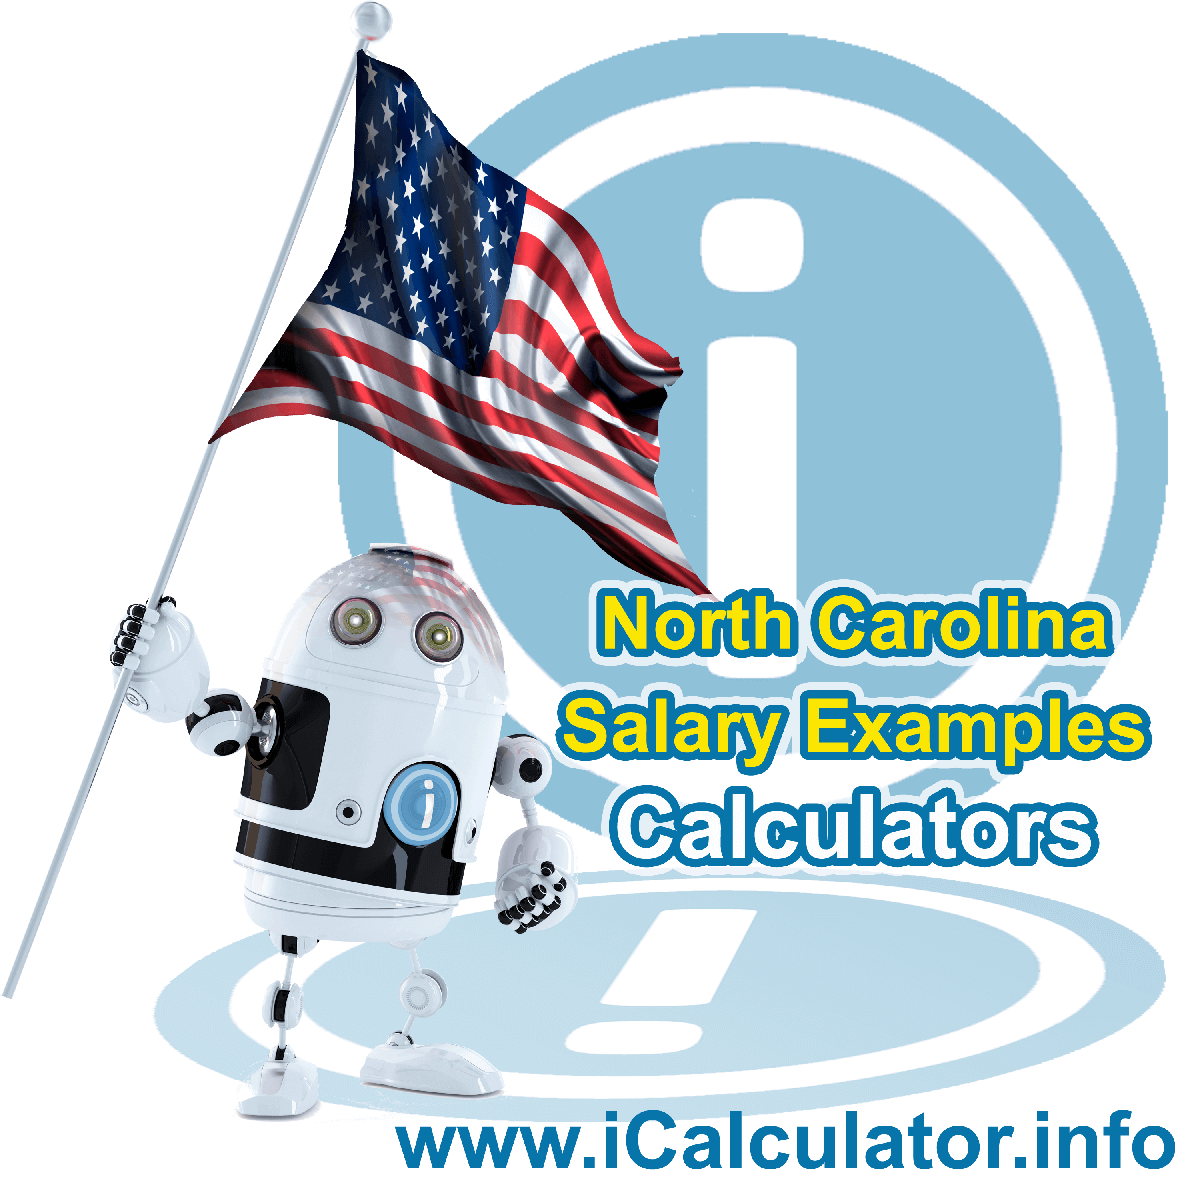 North Carolina Salary Example for $ 70,000.00 in 2023 | iCalculator™ | $ 70,000.00 salary example for employee and employer paying North Carolina State tincome taxes. Detailed salary after tax calculation including North Carolina State Tax, Federal State Tax, Medicare Deductions, Social Security, Capital Gains and other income tax and salary deductions complete with supporting North Carolina state tax tables 